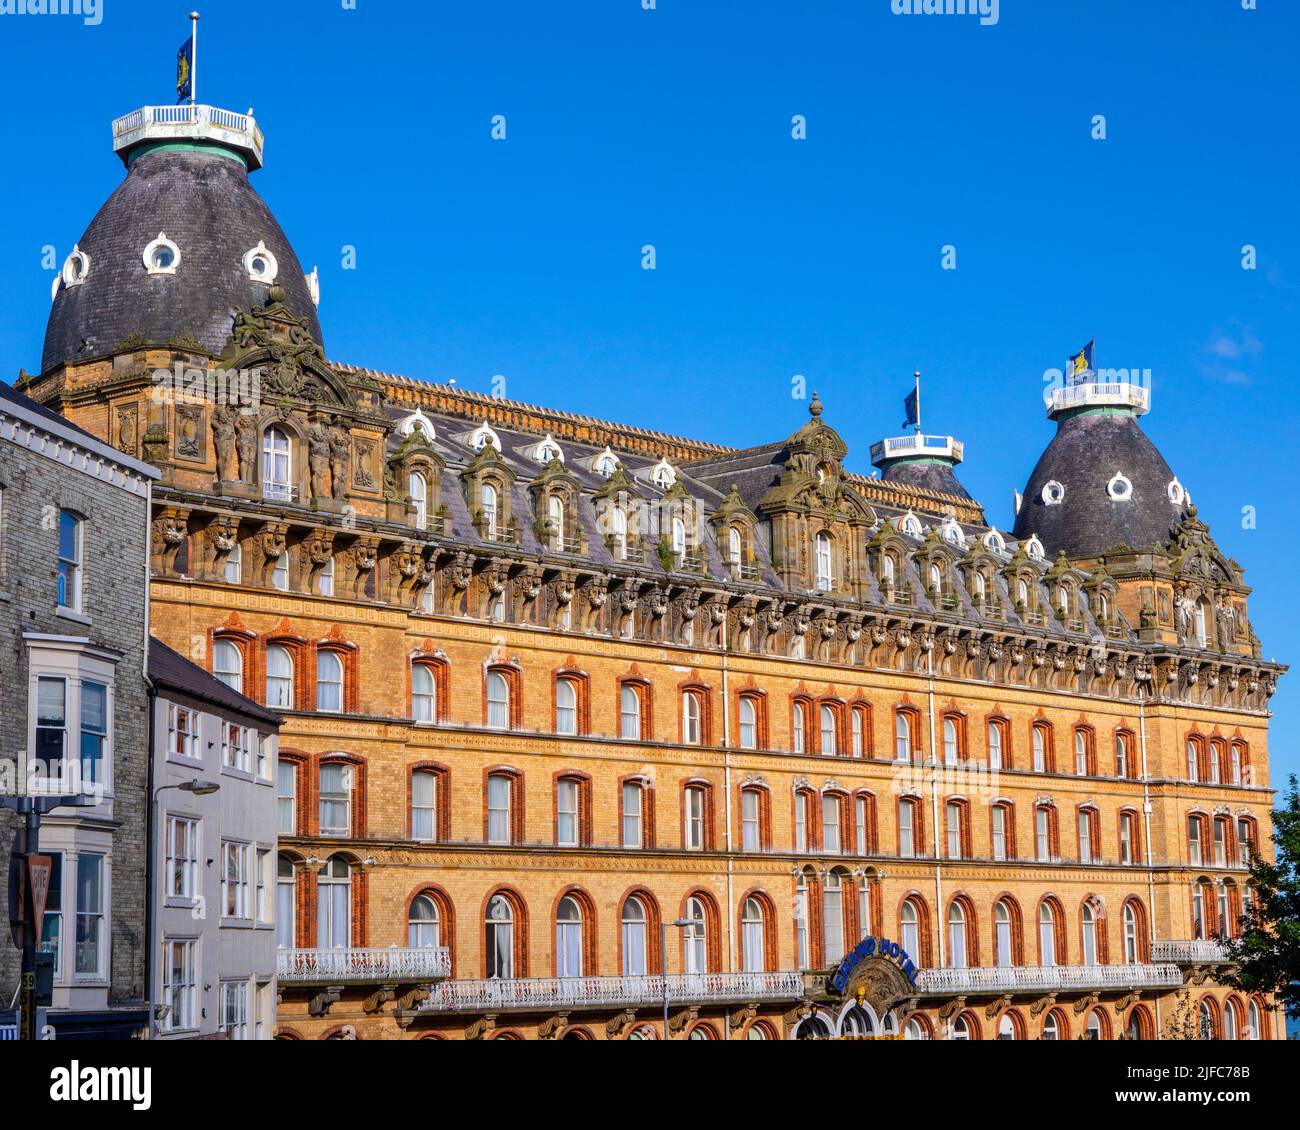 Scarborough, UK - June 8th 2022: The magnificent exterior of The Grand Hotel in the seaside town of Scarborough in North Yorkshire, UK. Stock Photo